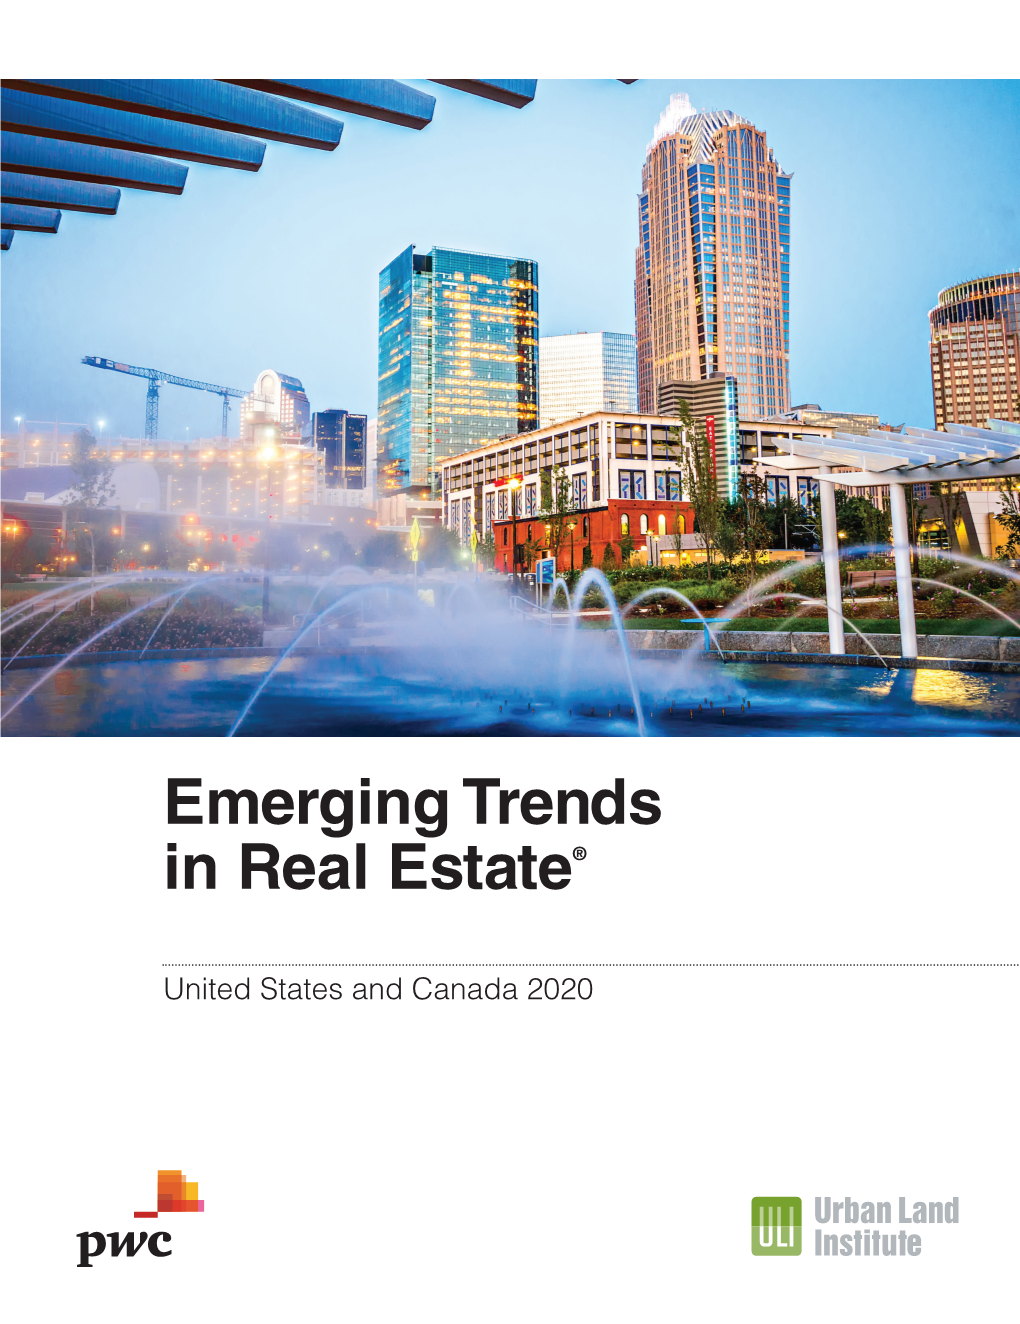 Emerging Trends in Real Estate® 2020 Highlights